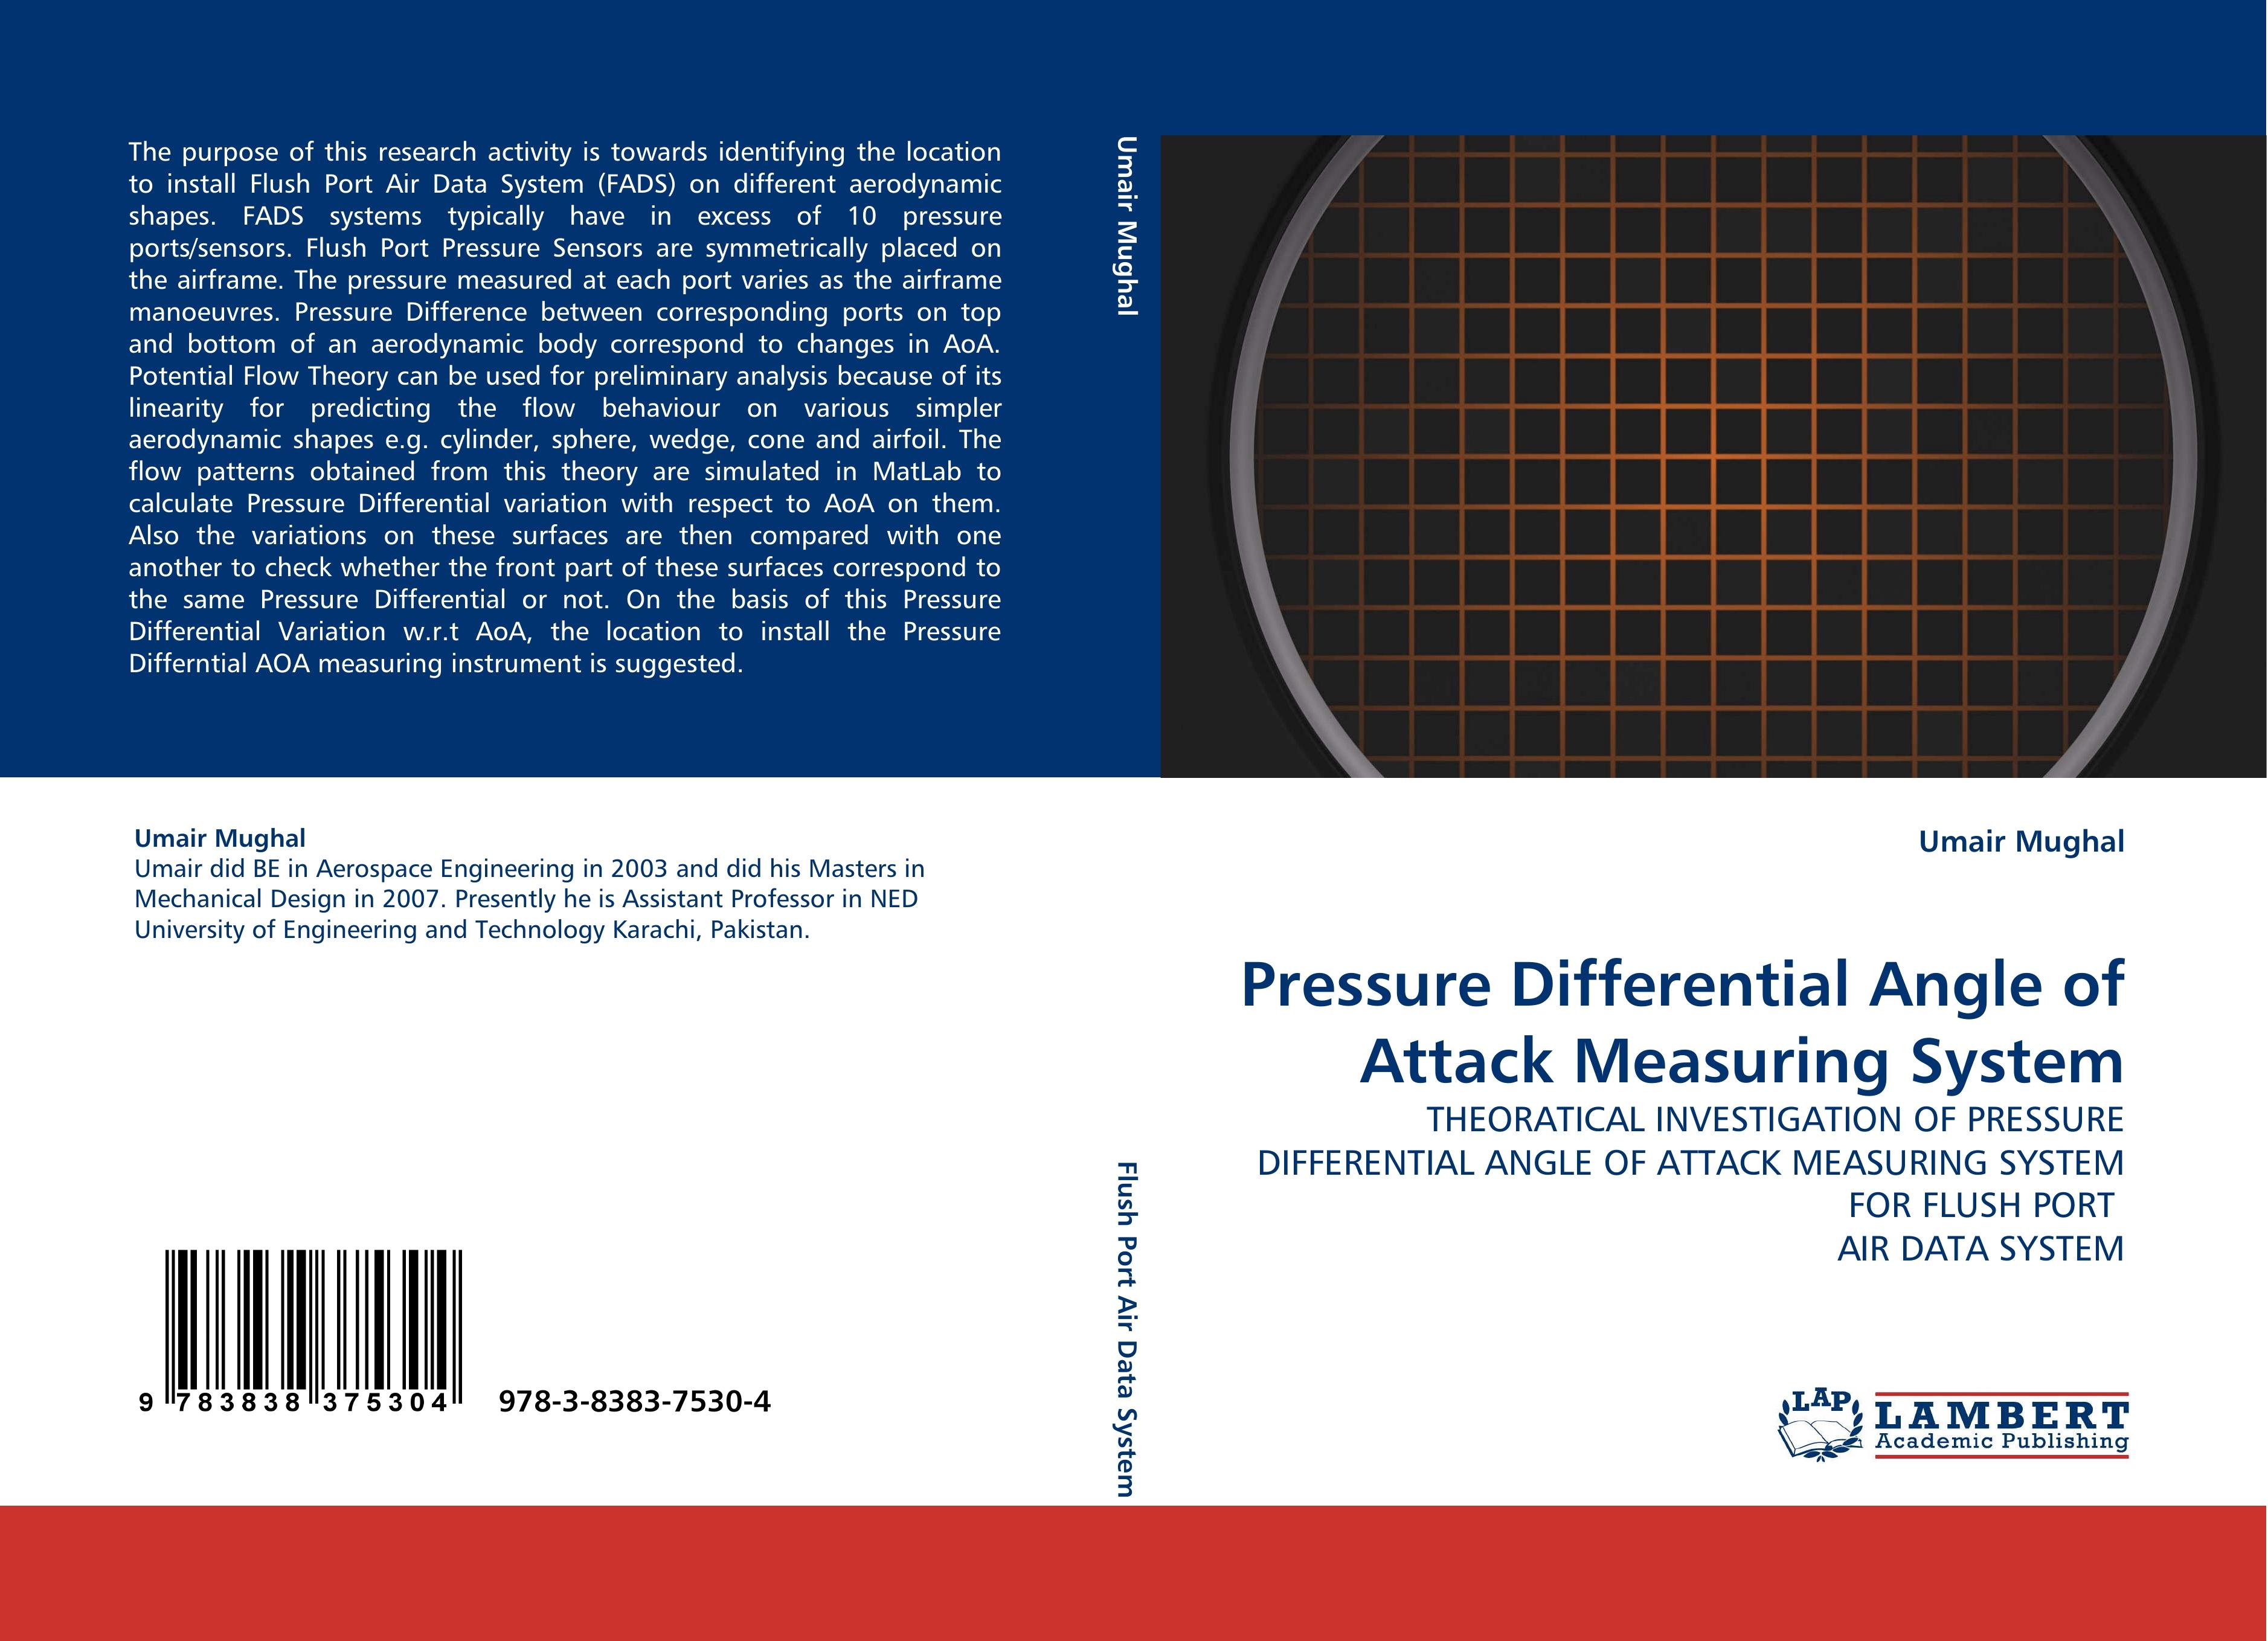 Pressure Differential Angle of Attack Measuring System | THEORATICAL INVESTIGATION OF PRESSURE DIFFERENTIAL ANGLE OF ATTACK MEASURING SYSTEM FOR FLUSH PORT AIR DATA SYSTEM | Umair Mughal | Taschenbuch - Mughal, Umair